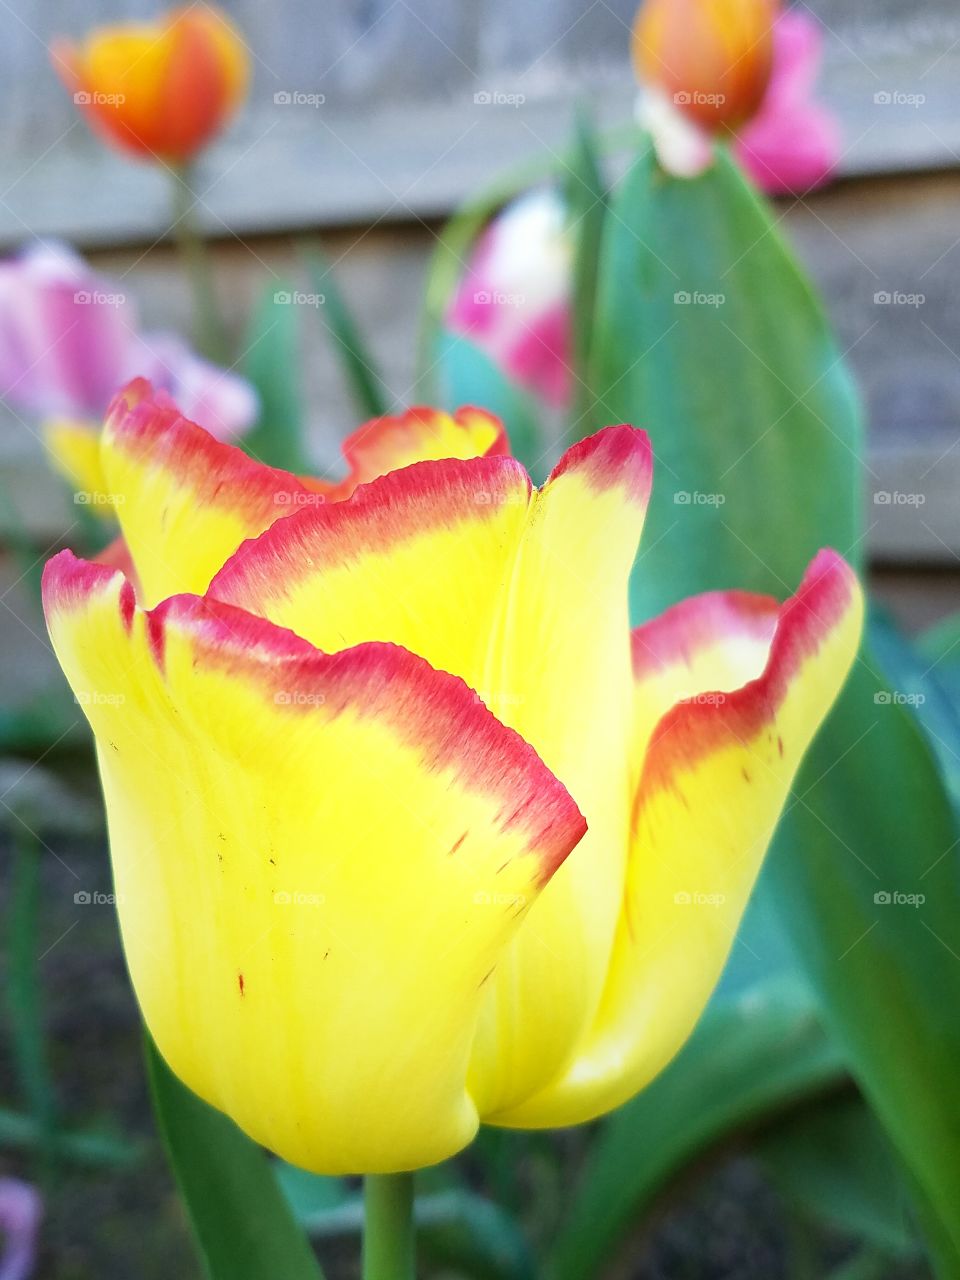 Red tipped, yellow tulip